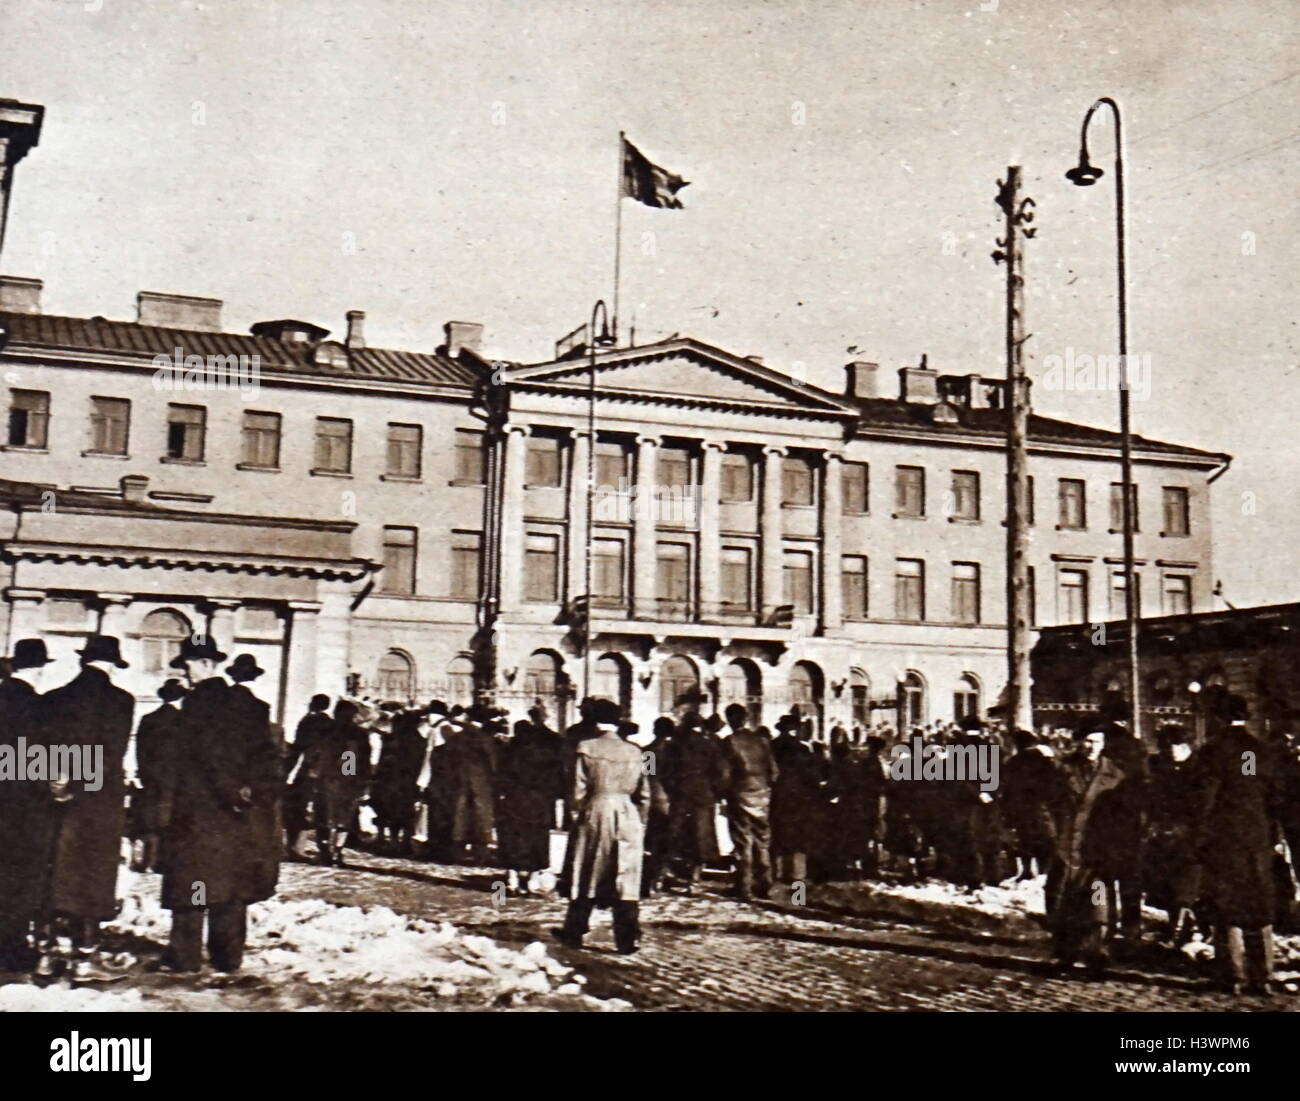 Photograph of crowds gathering outside of the Presidential Palace, Helsinki, for the proposal of the Sino-Soviet Treaty of Friendship. Dated 20th Century Stock Photo